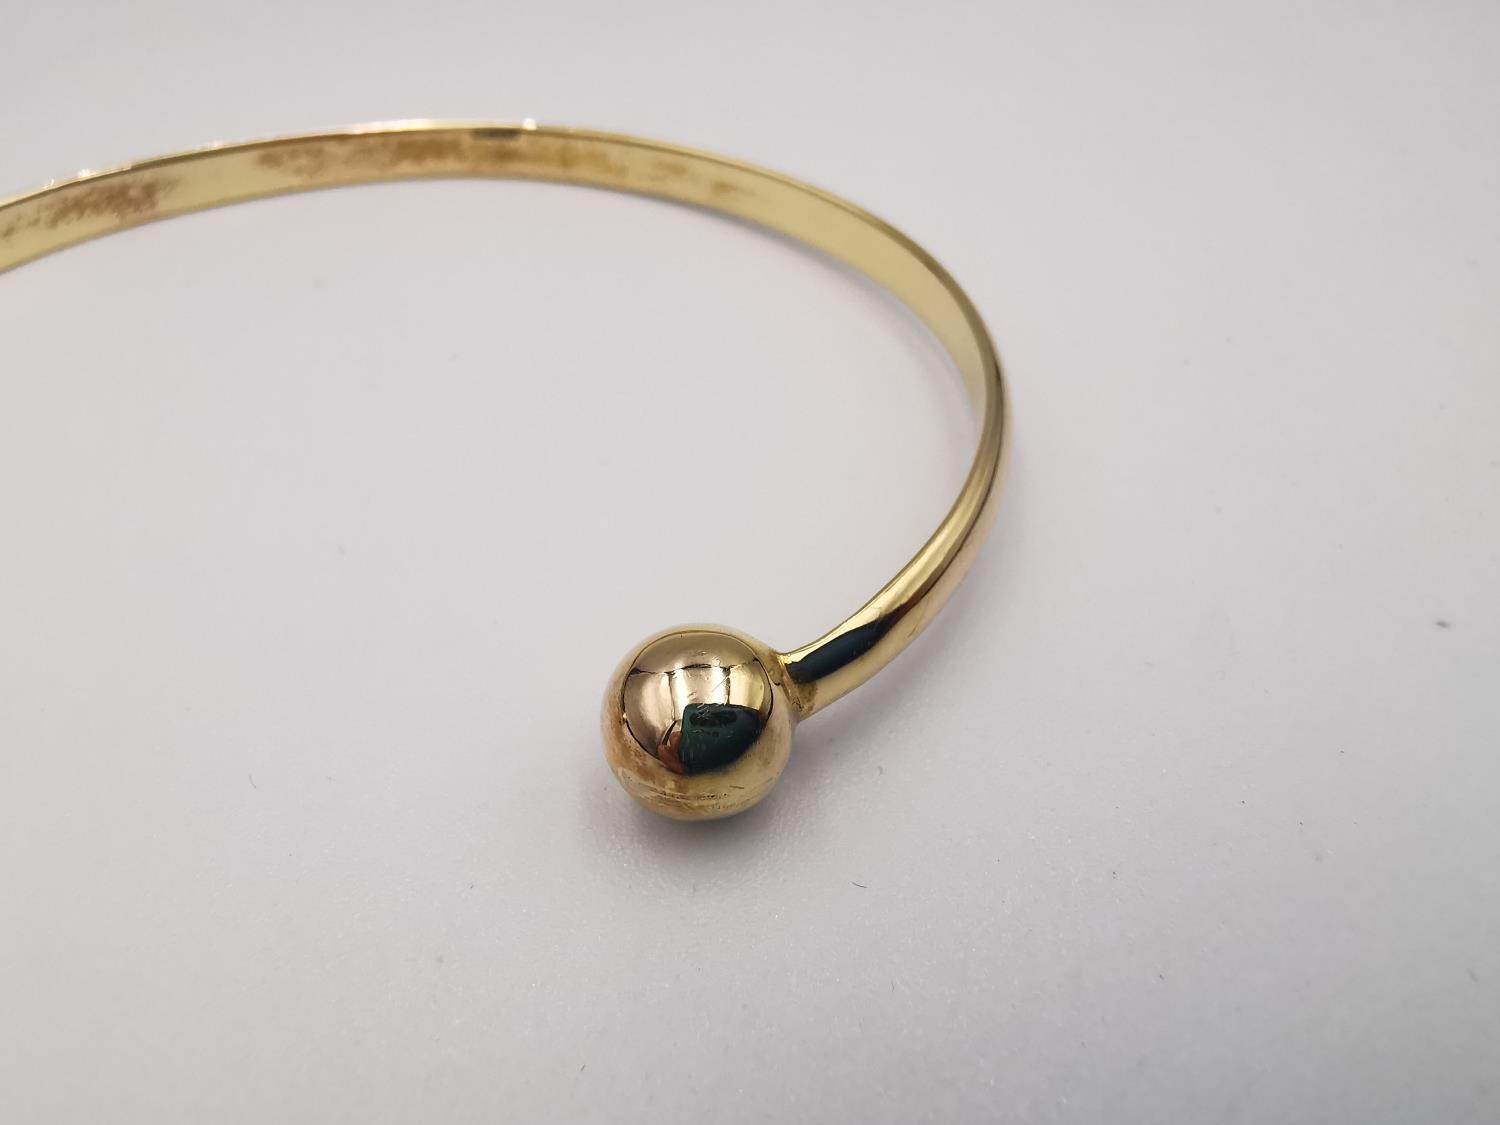 A 9ct yellow gold D-shaped bangle with ball ends. Hallmarked for 9ct. Weight.11.42g Dia.7cm - Image 6 of 6